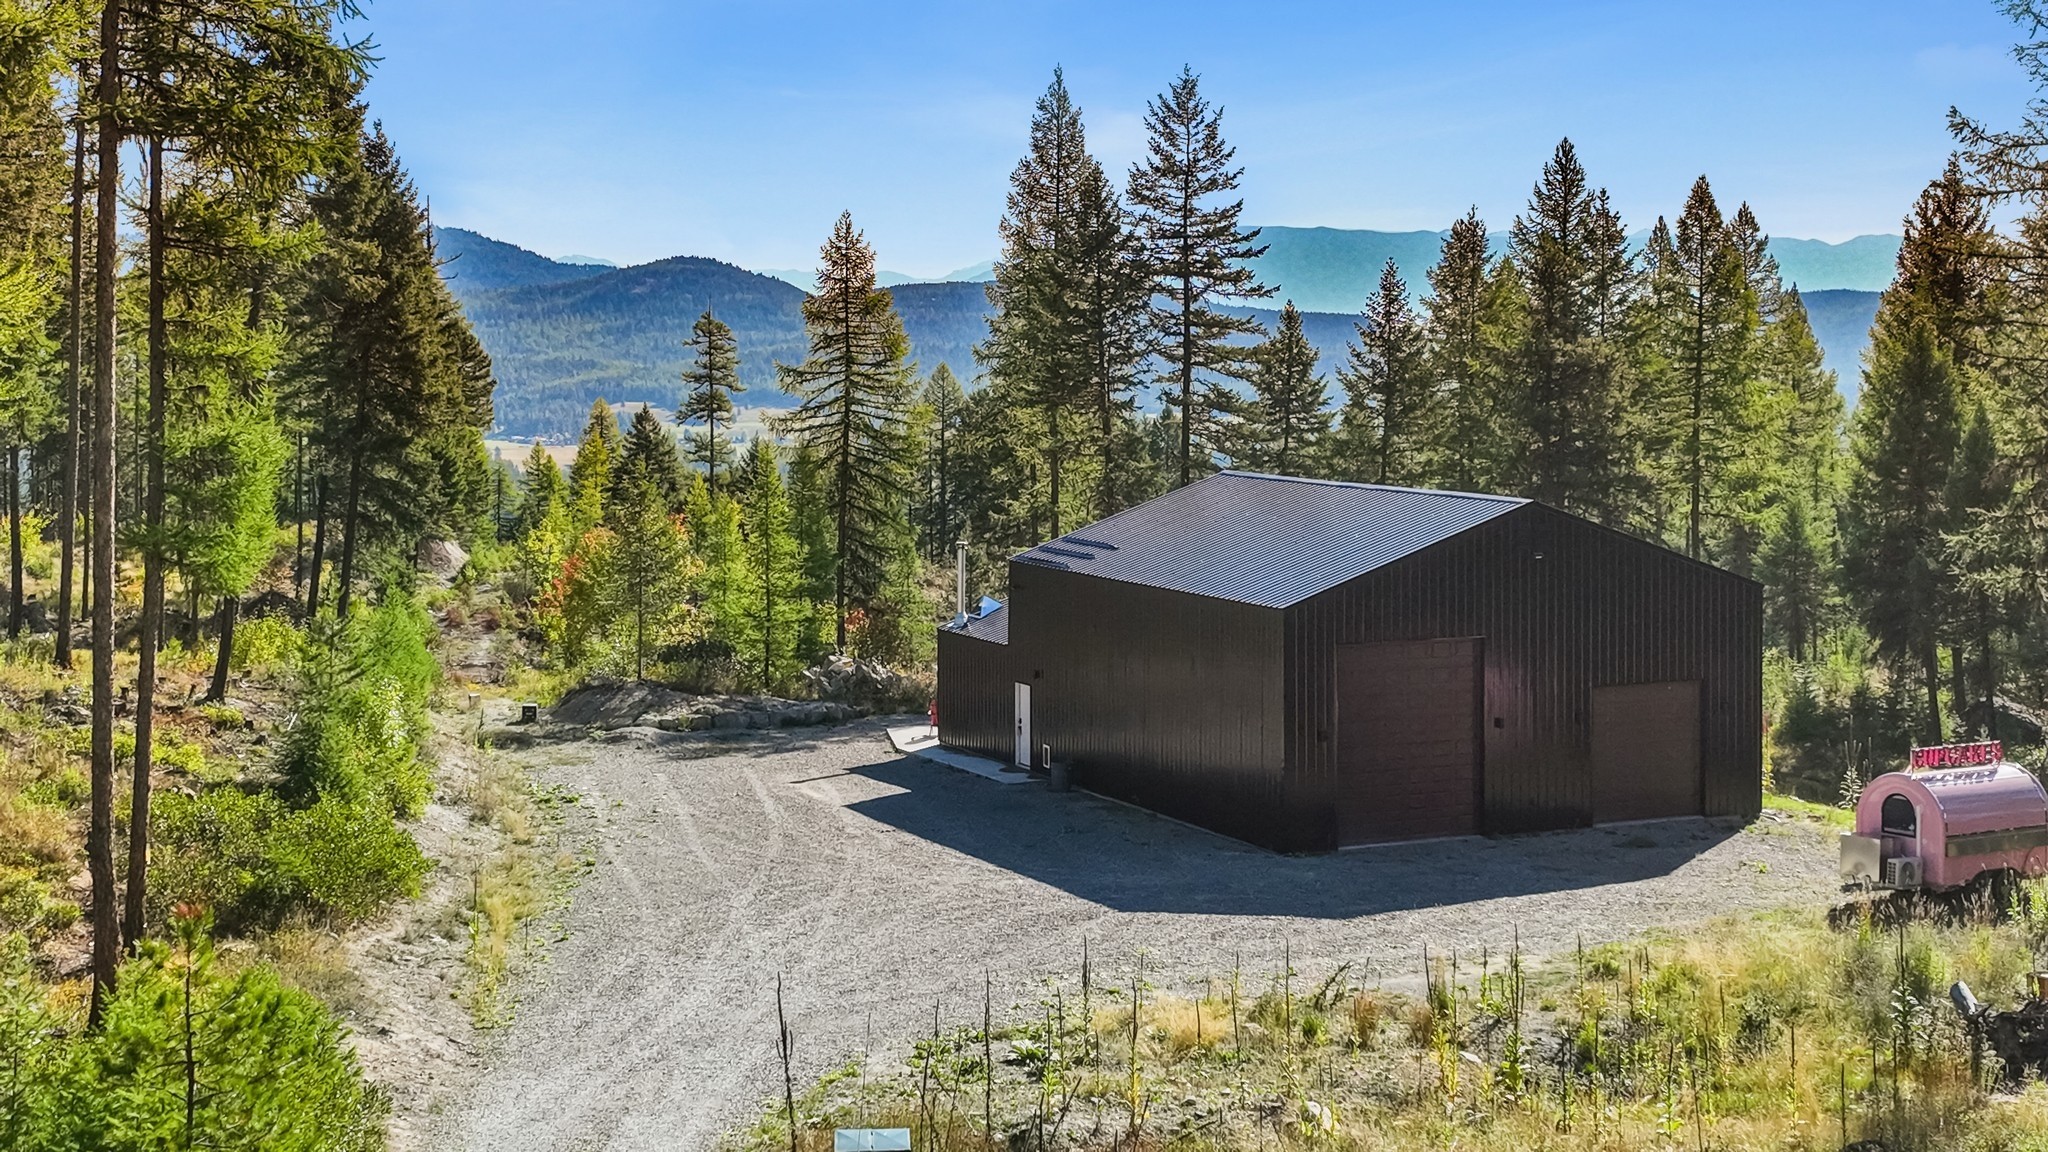 This nearly new barndominium on a very private 10 acres offers views of the Whitefish Mountain Range in a peaceful ridge top setting.   The living quarters has 2 bedrooms (or 1 bedroom +office), a 3/4 bath with an open living area and a laundry/mechanical area.    Eastern facing glass doors open to a patio for enjoying colorful sunrises over the mountains and wildlife galore.  The comfortable apartment is attached to the large foam insulated heated garage/shop (1547 Sq. Ft.) which has room to store all your outdoor toys and equipment.  Septic permit of record is for 5 bedrooms. RV hook-up and electric and septic clean out. Live in the apartment while building your Montana dream home.  Northern boundary borders the National Forest Service for unlimited exploration and privacy.  Call Hunter Homes at 406-314-1417 or your real estate professional for a private tour.